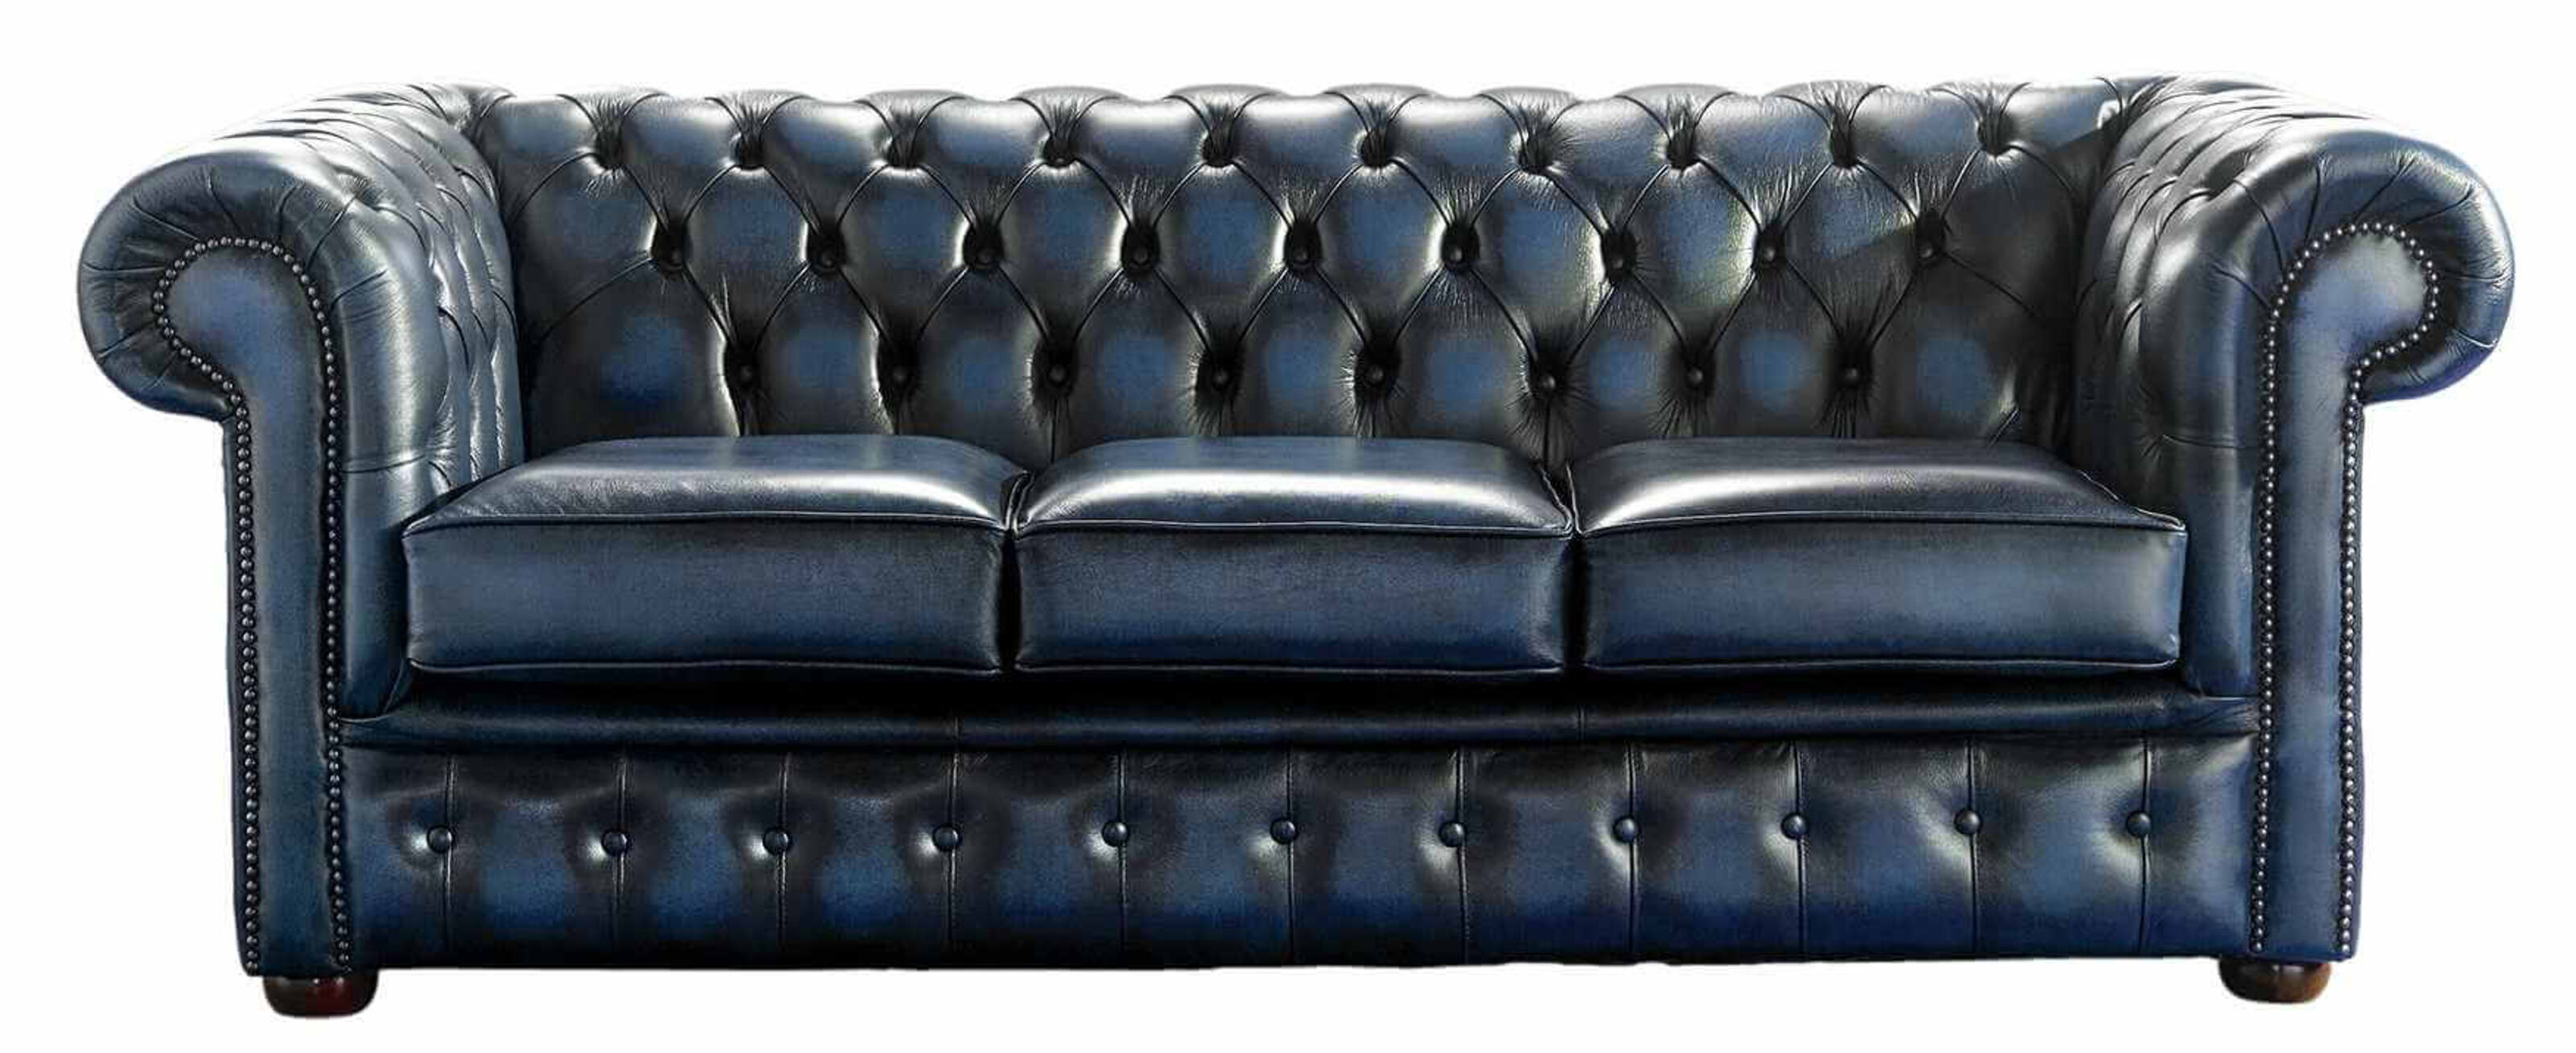 Embrace the Classic Elegance of Chesterfield Sofas from England  %Post Title